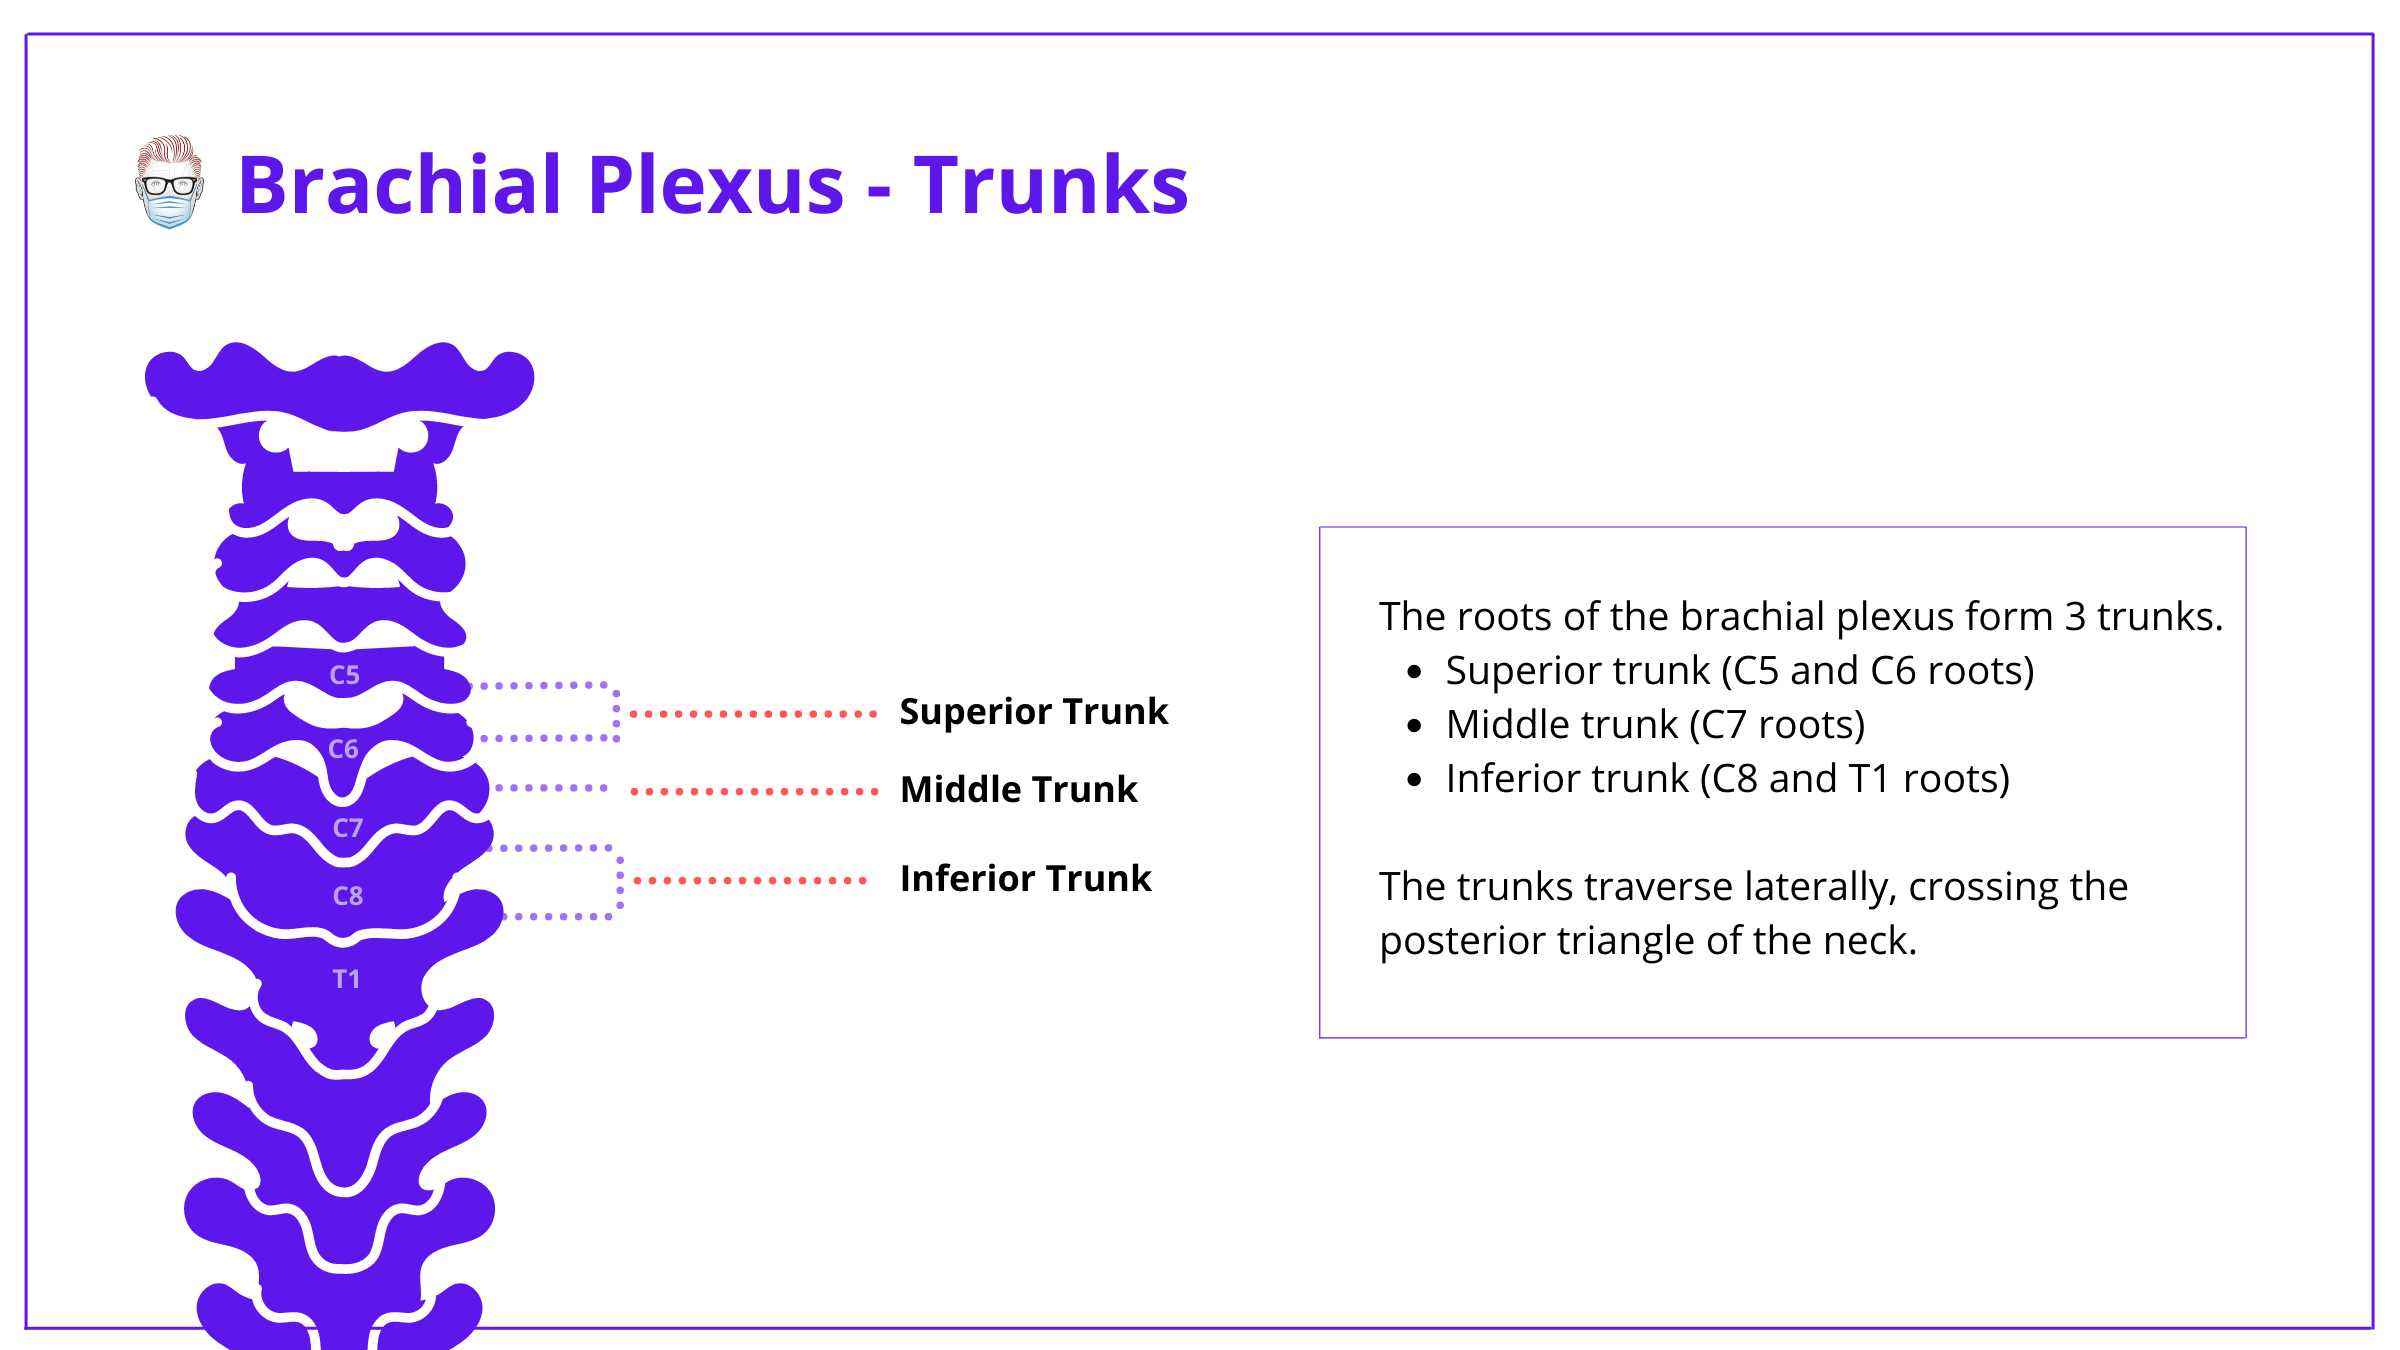 brachial plexus, anatomy, brachial plexus anatomy, roots, trunks, divisions, cords, branches